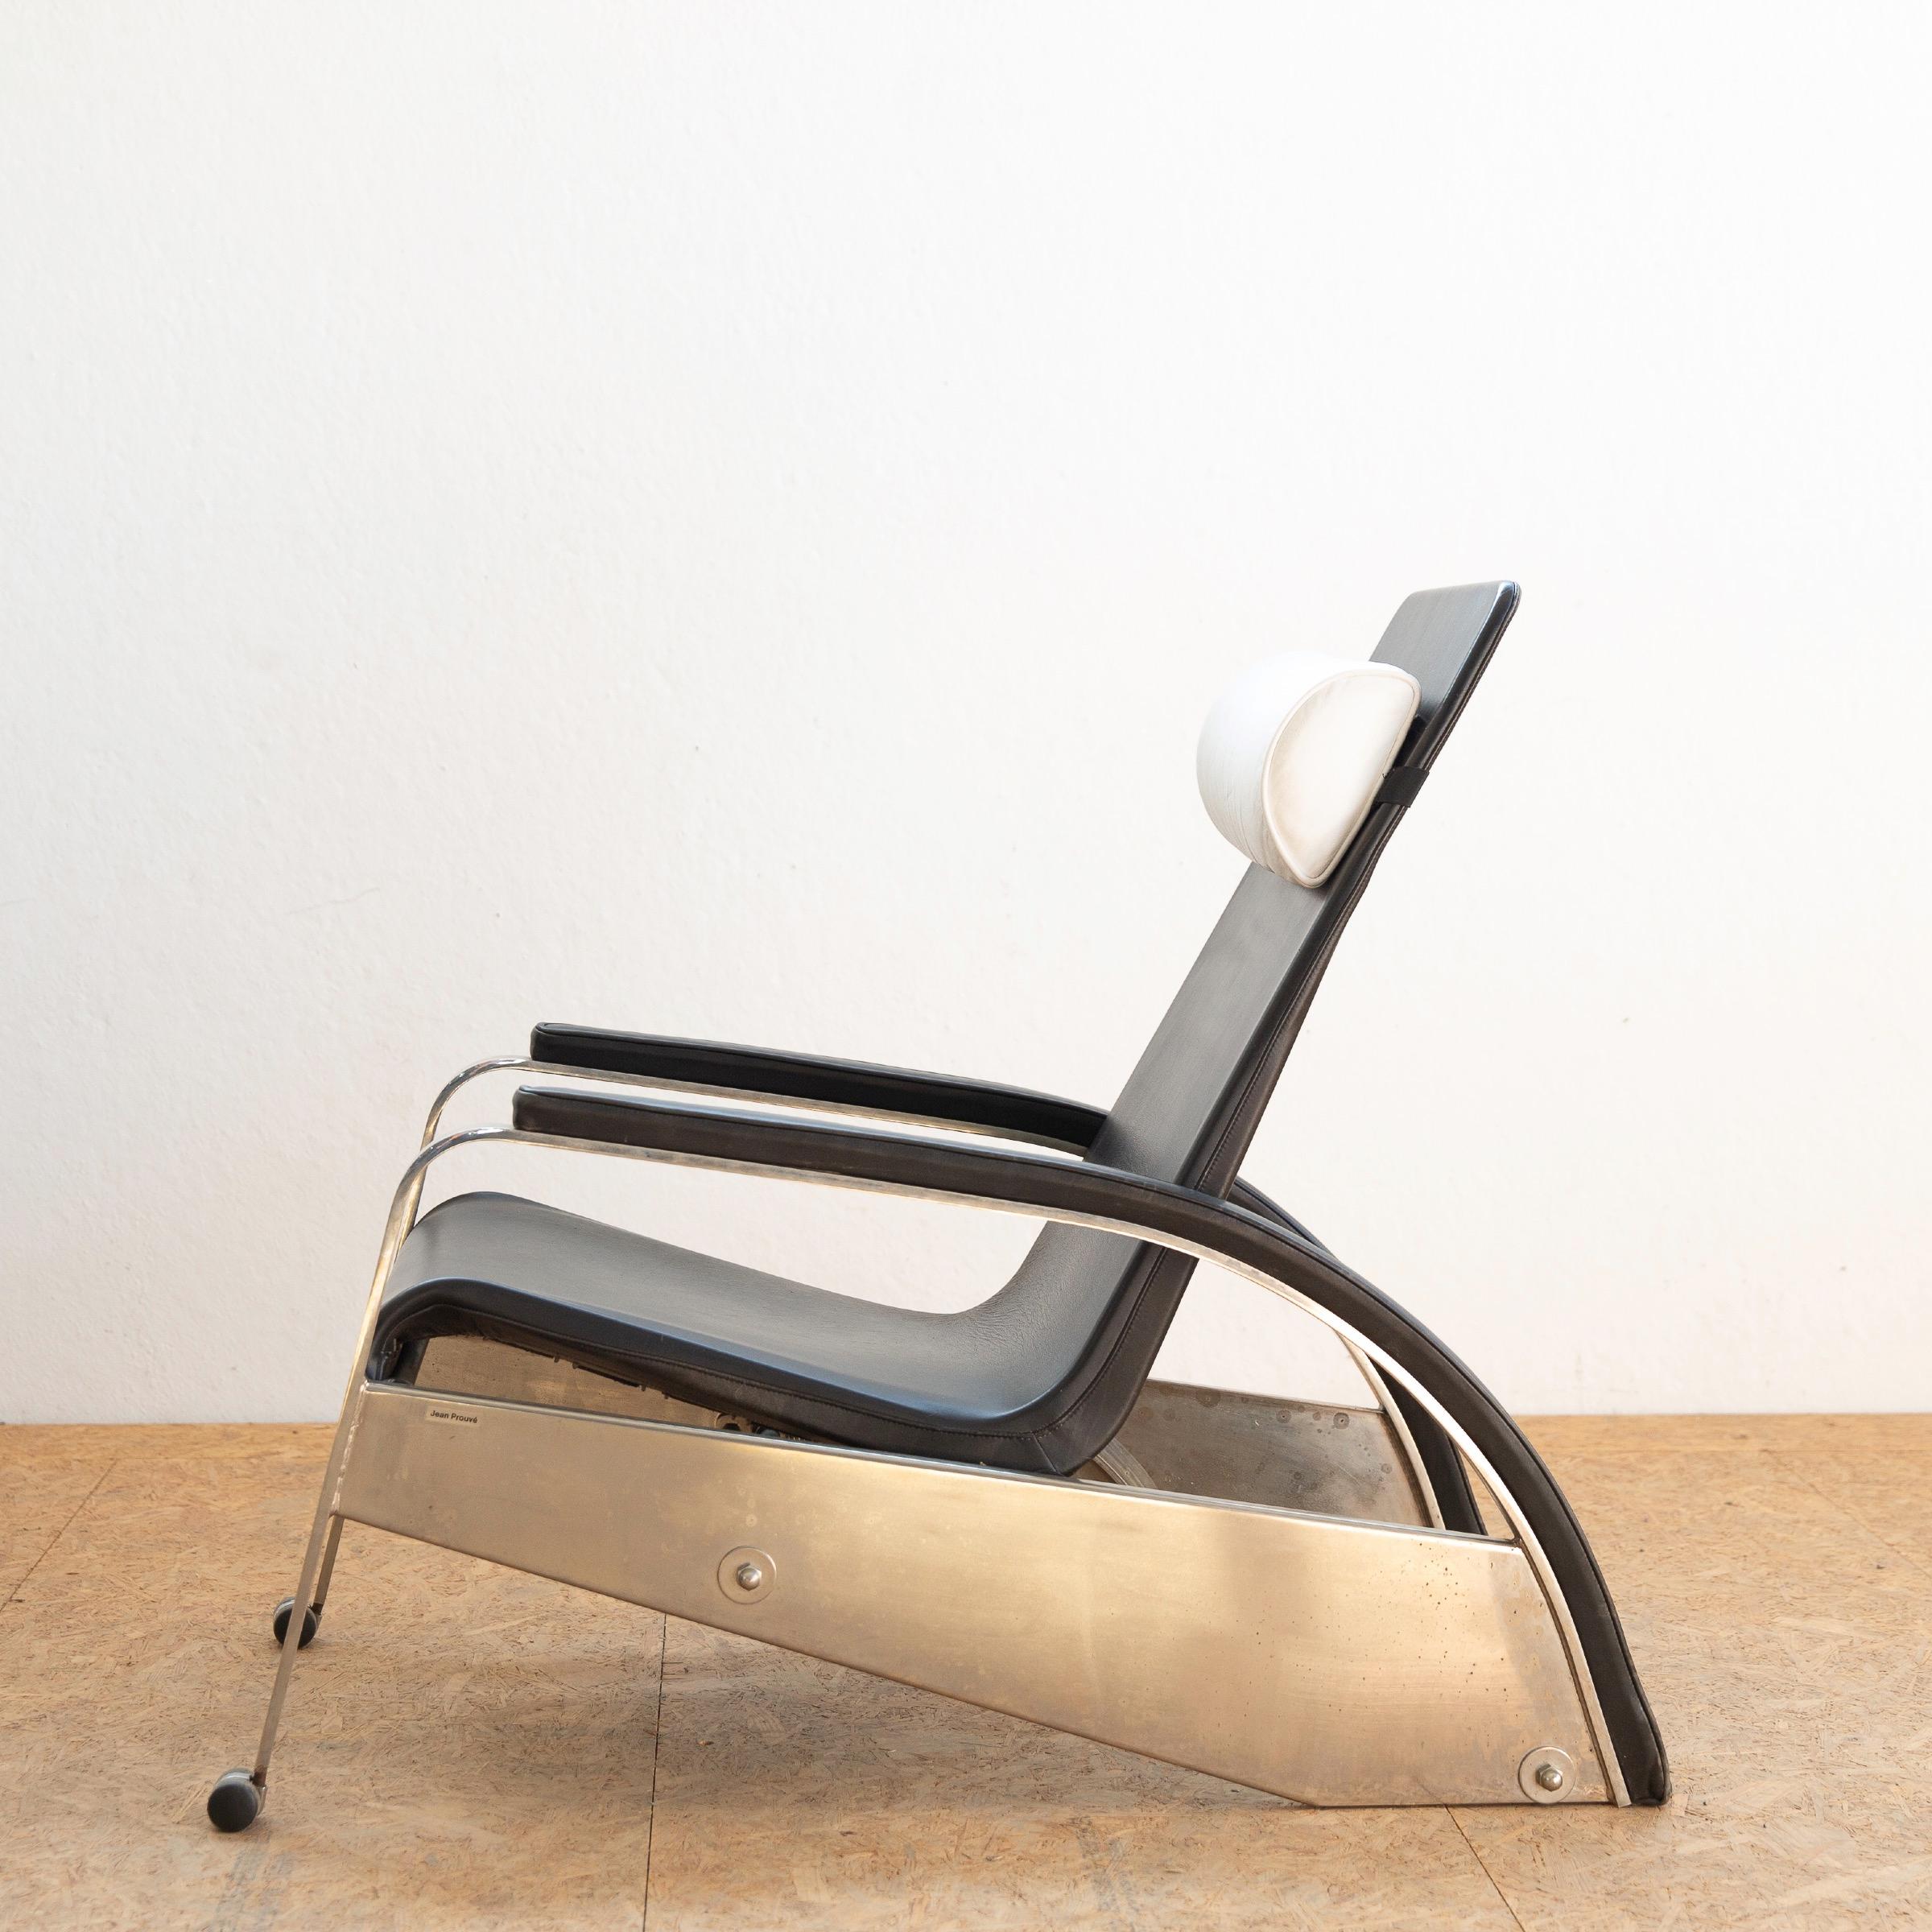 Adjustable lounge chair with stainless steel frame, black leather upholstered sprung seat, black armrests, white head rest. Structure mounted on castors. Manufactured by Tecta, Germany between 1983 and 1989.
This chair has been produced in very